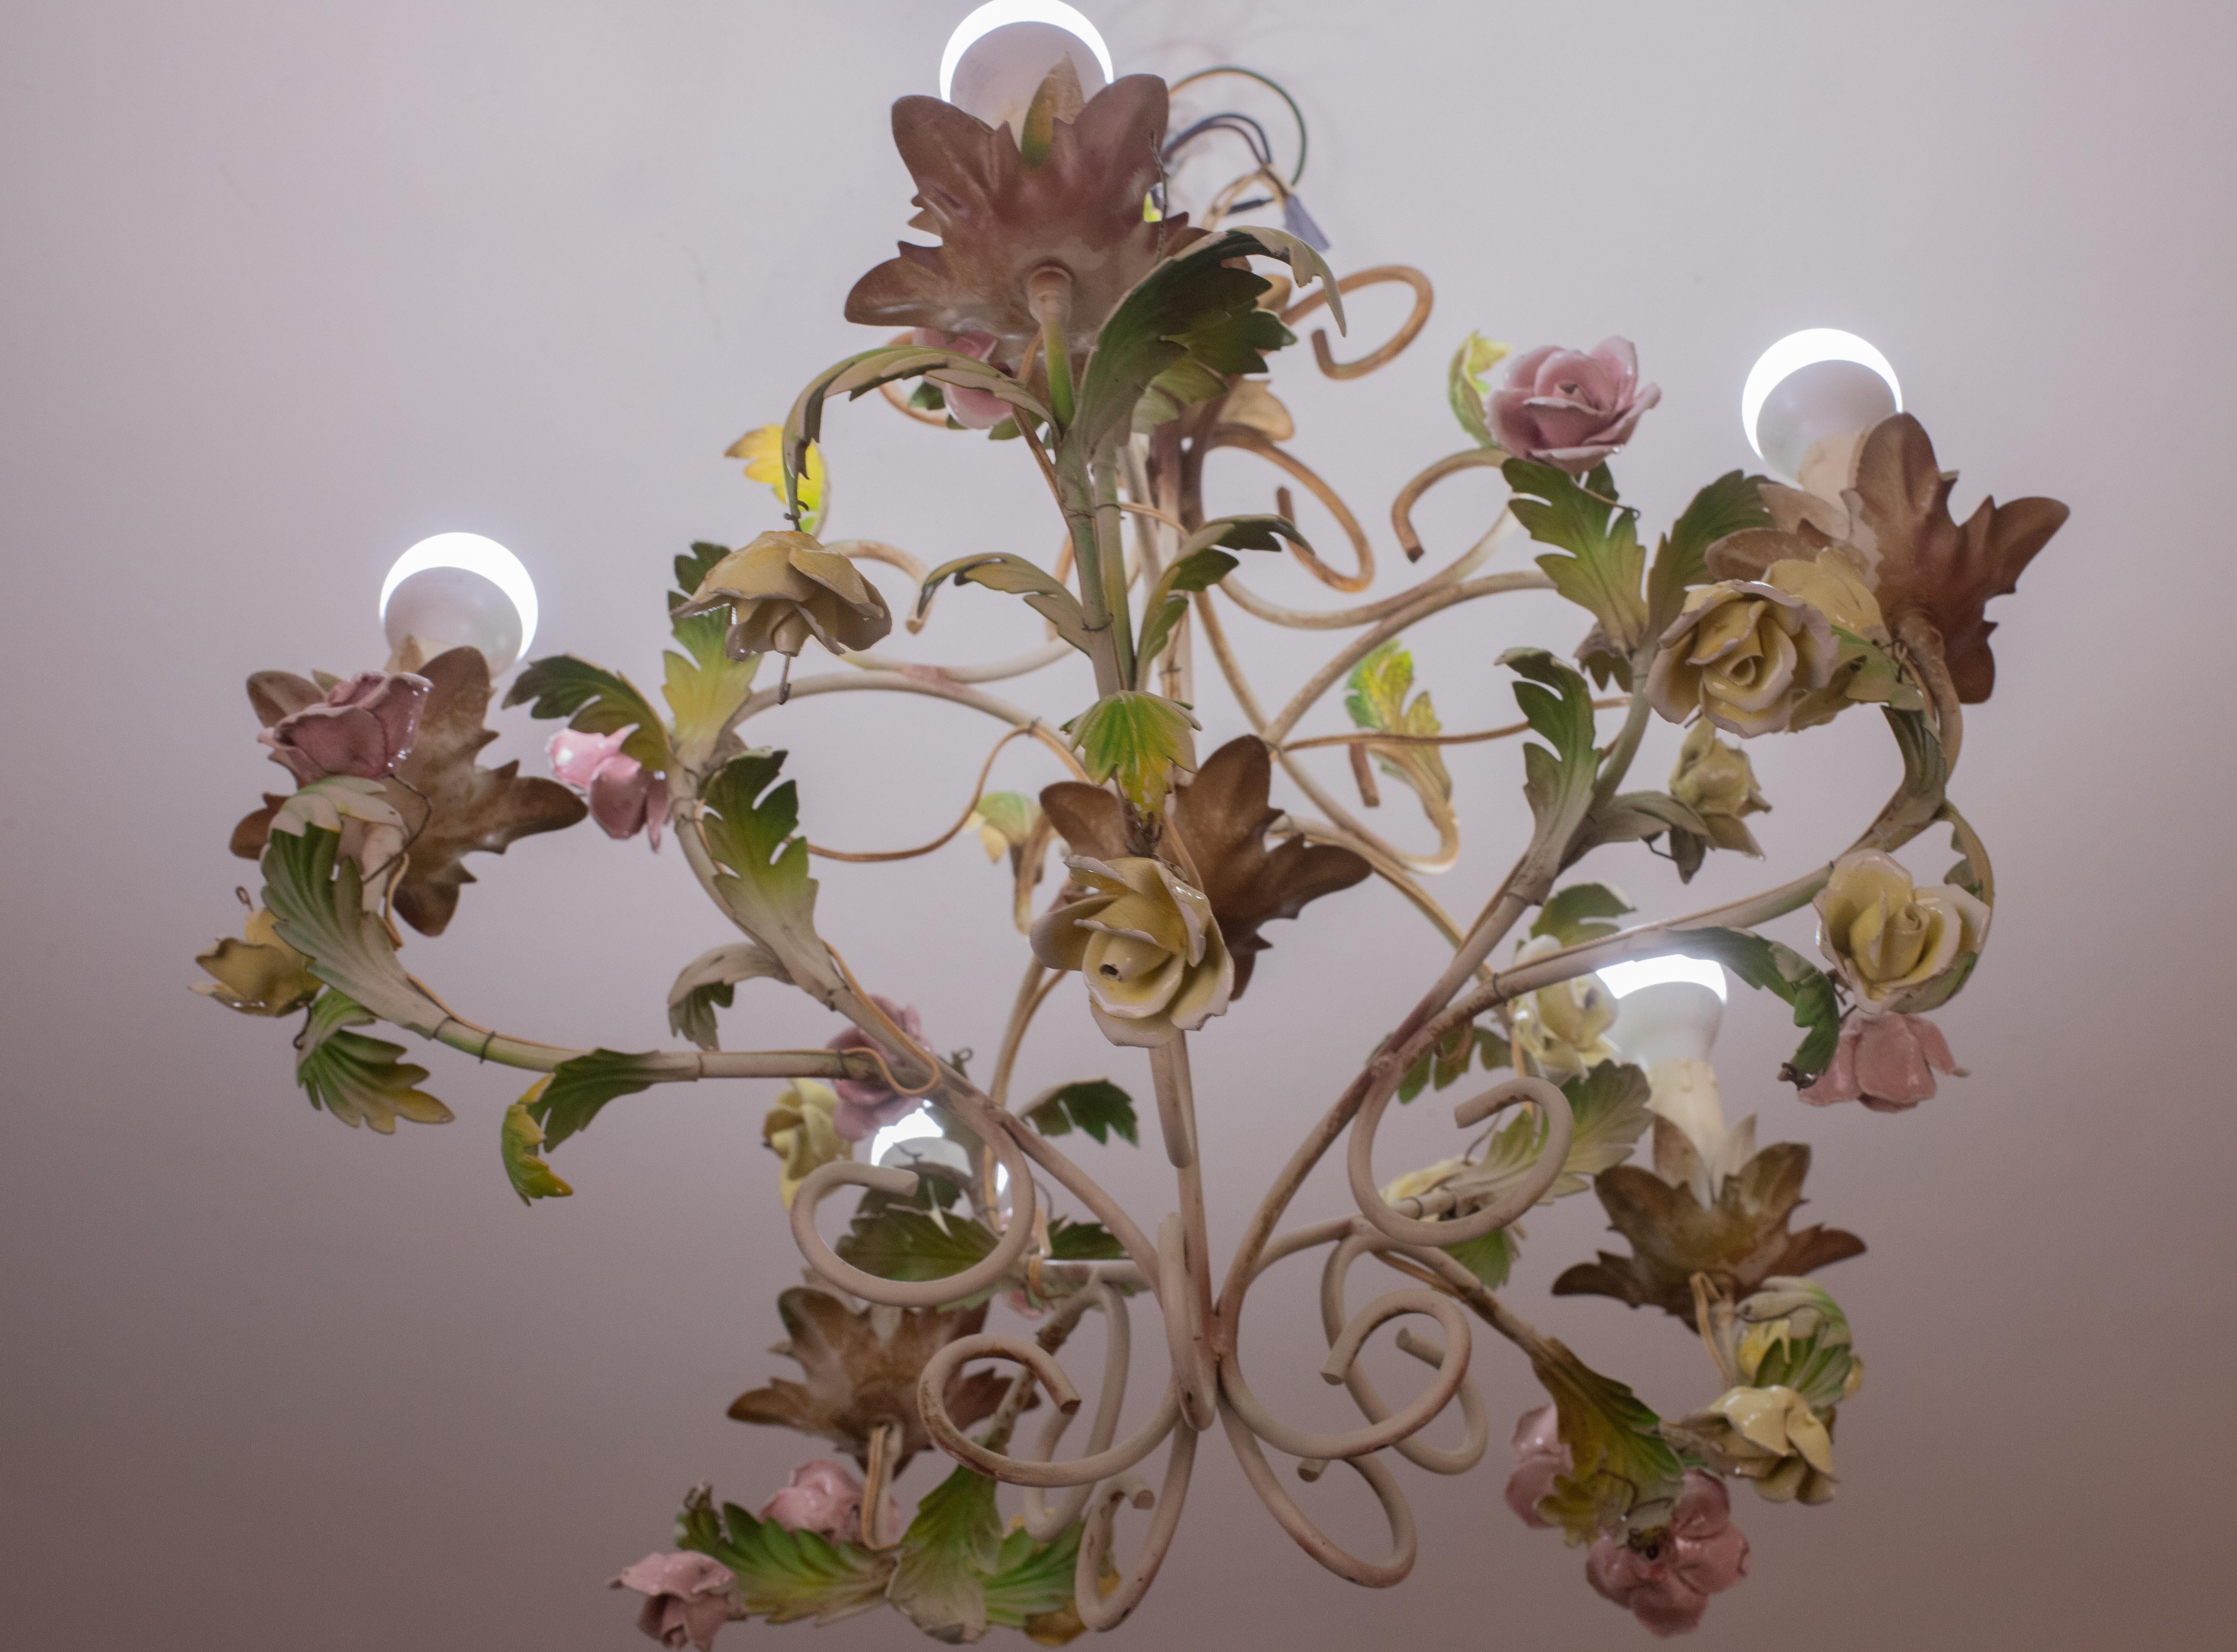 Italian Vintage Iron and Ceramic Flowers Chandelier, 1970s For Sale 4